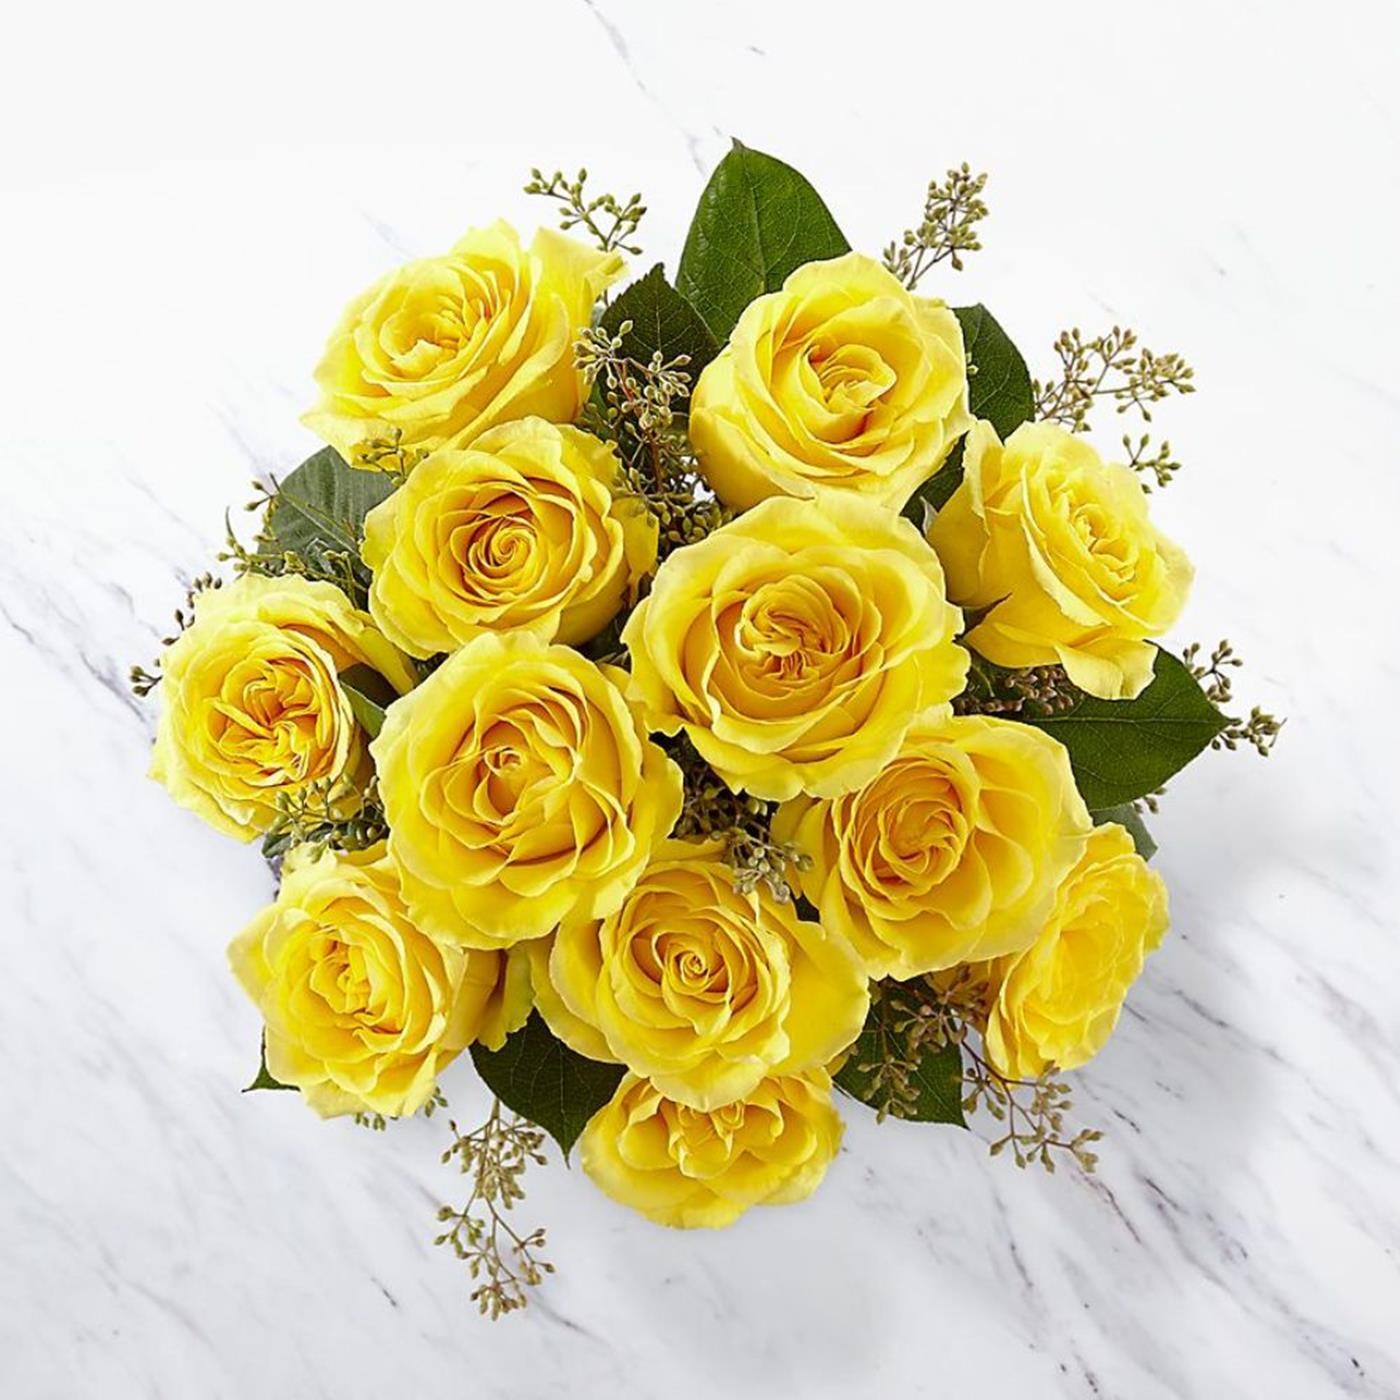 product image for 12 Yellow Rose Bunch